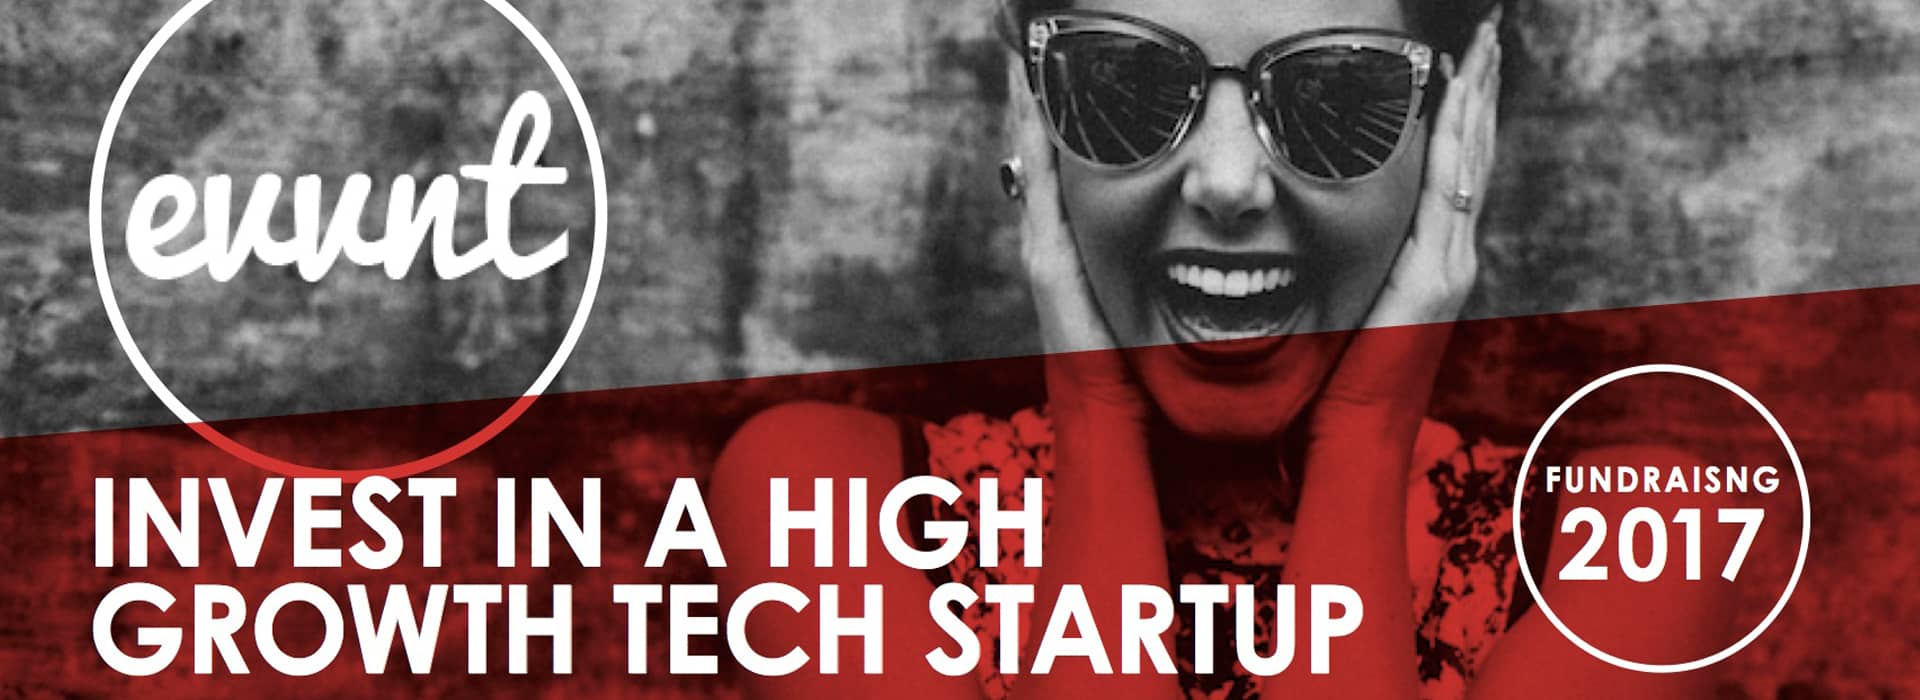 Invest in a High Growth Tech Startup